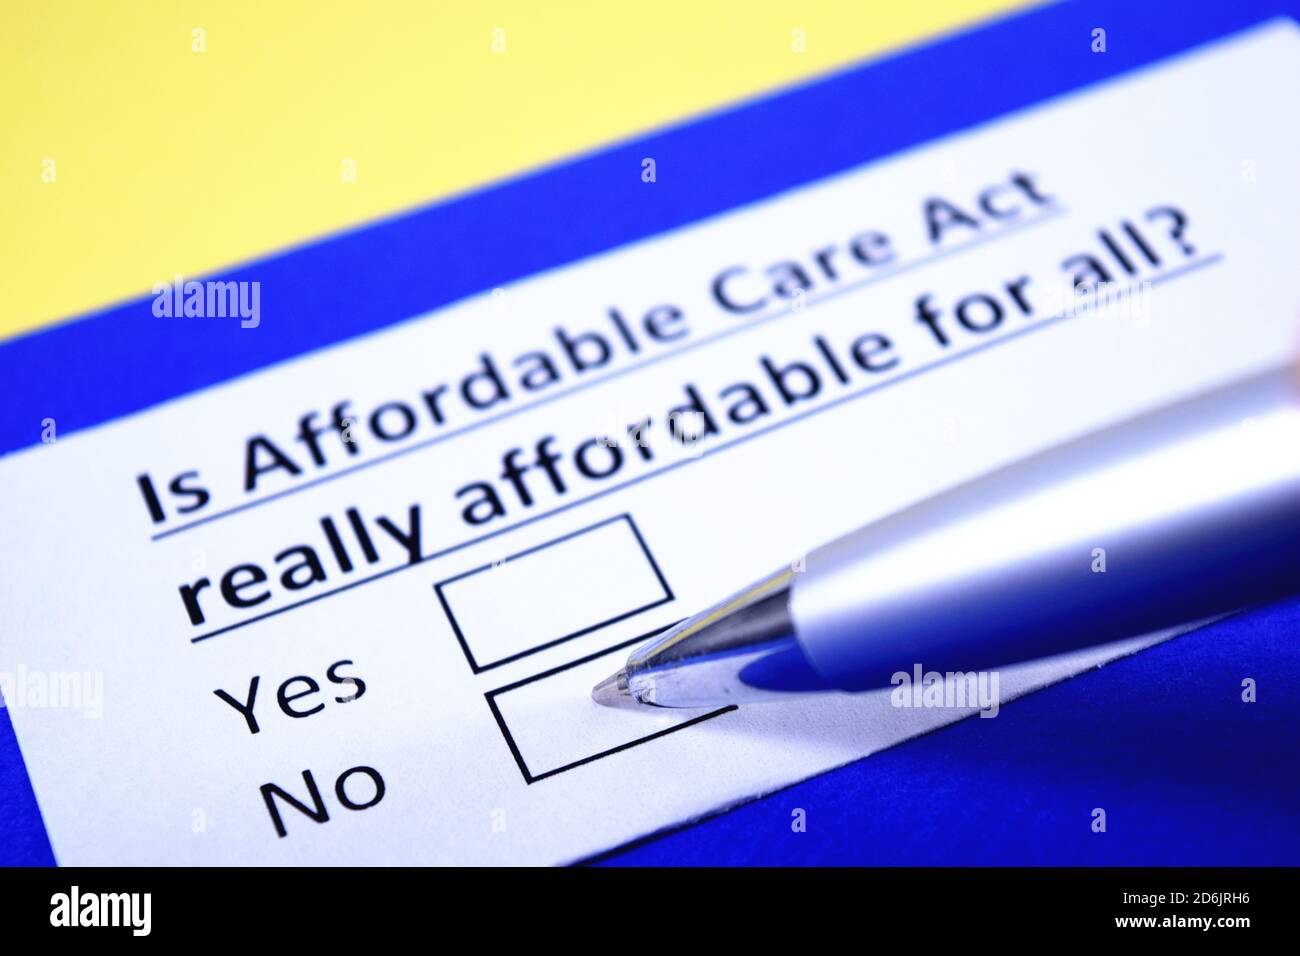 Is affordable Care Act really affordable for all? Yes or no? Stock Photo